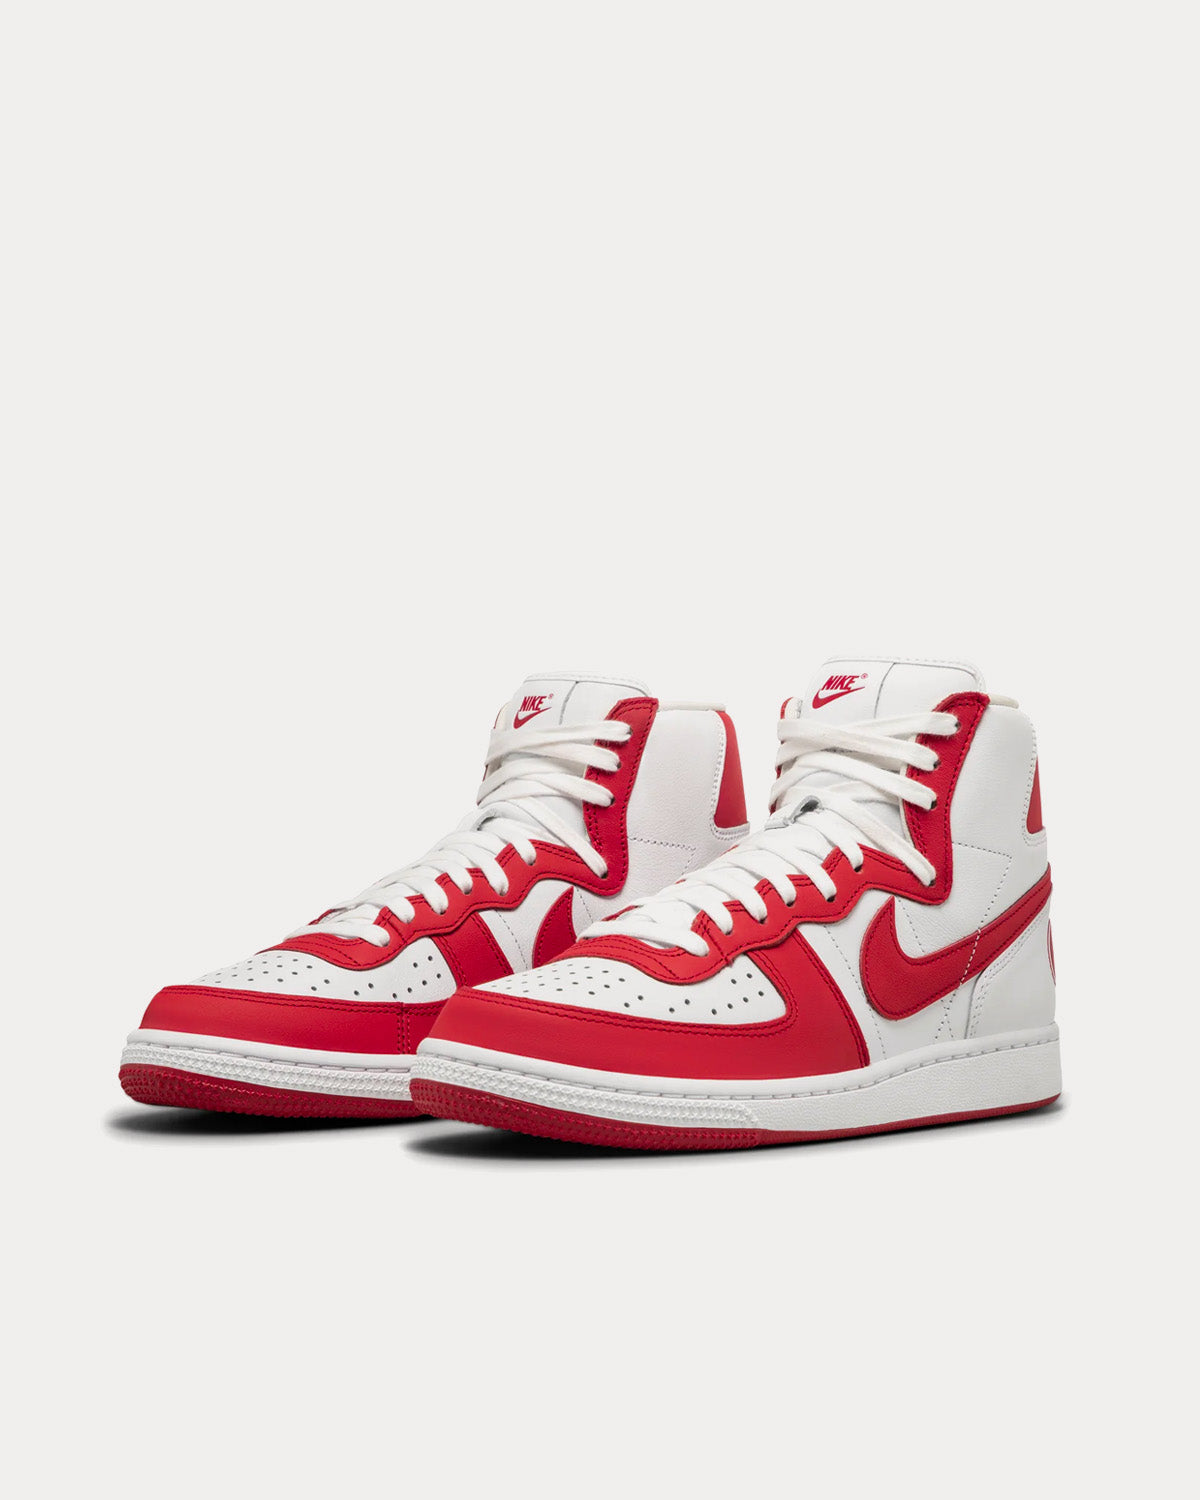 Nike x Comme des Garçons - Terminator Red / White High Top Sneakers